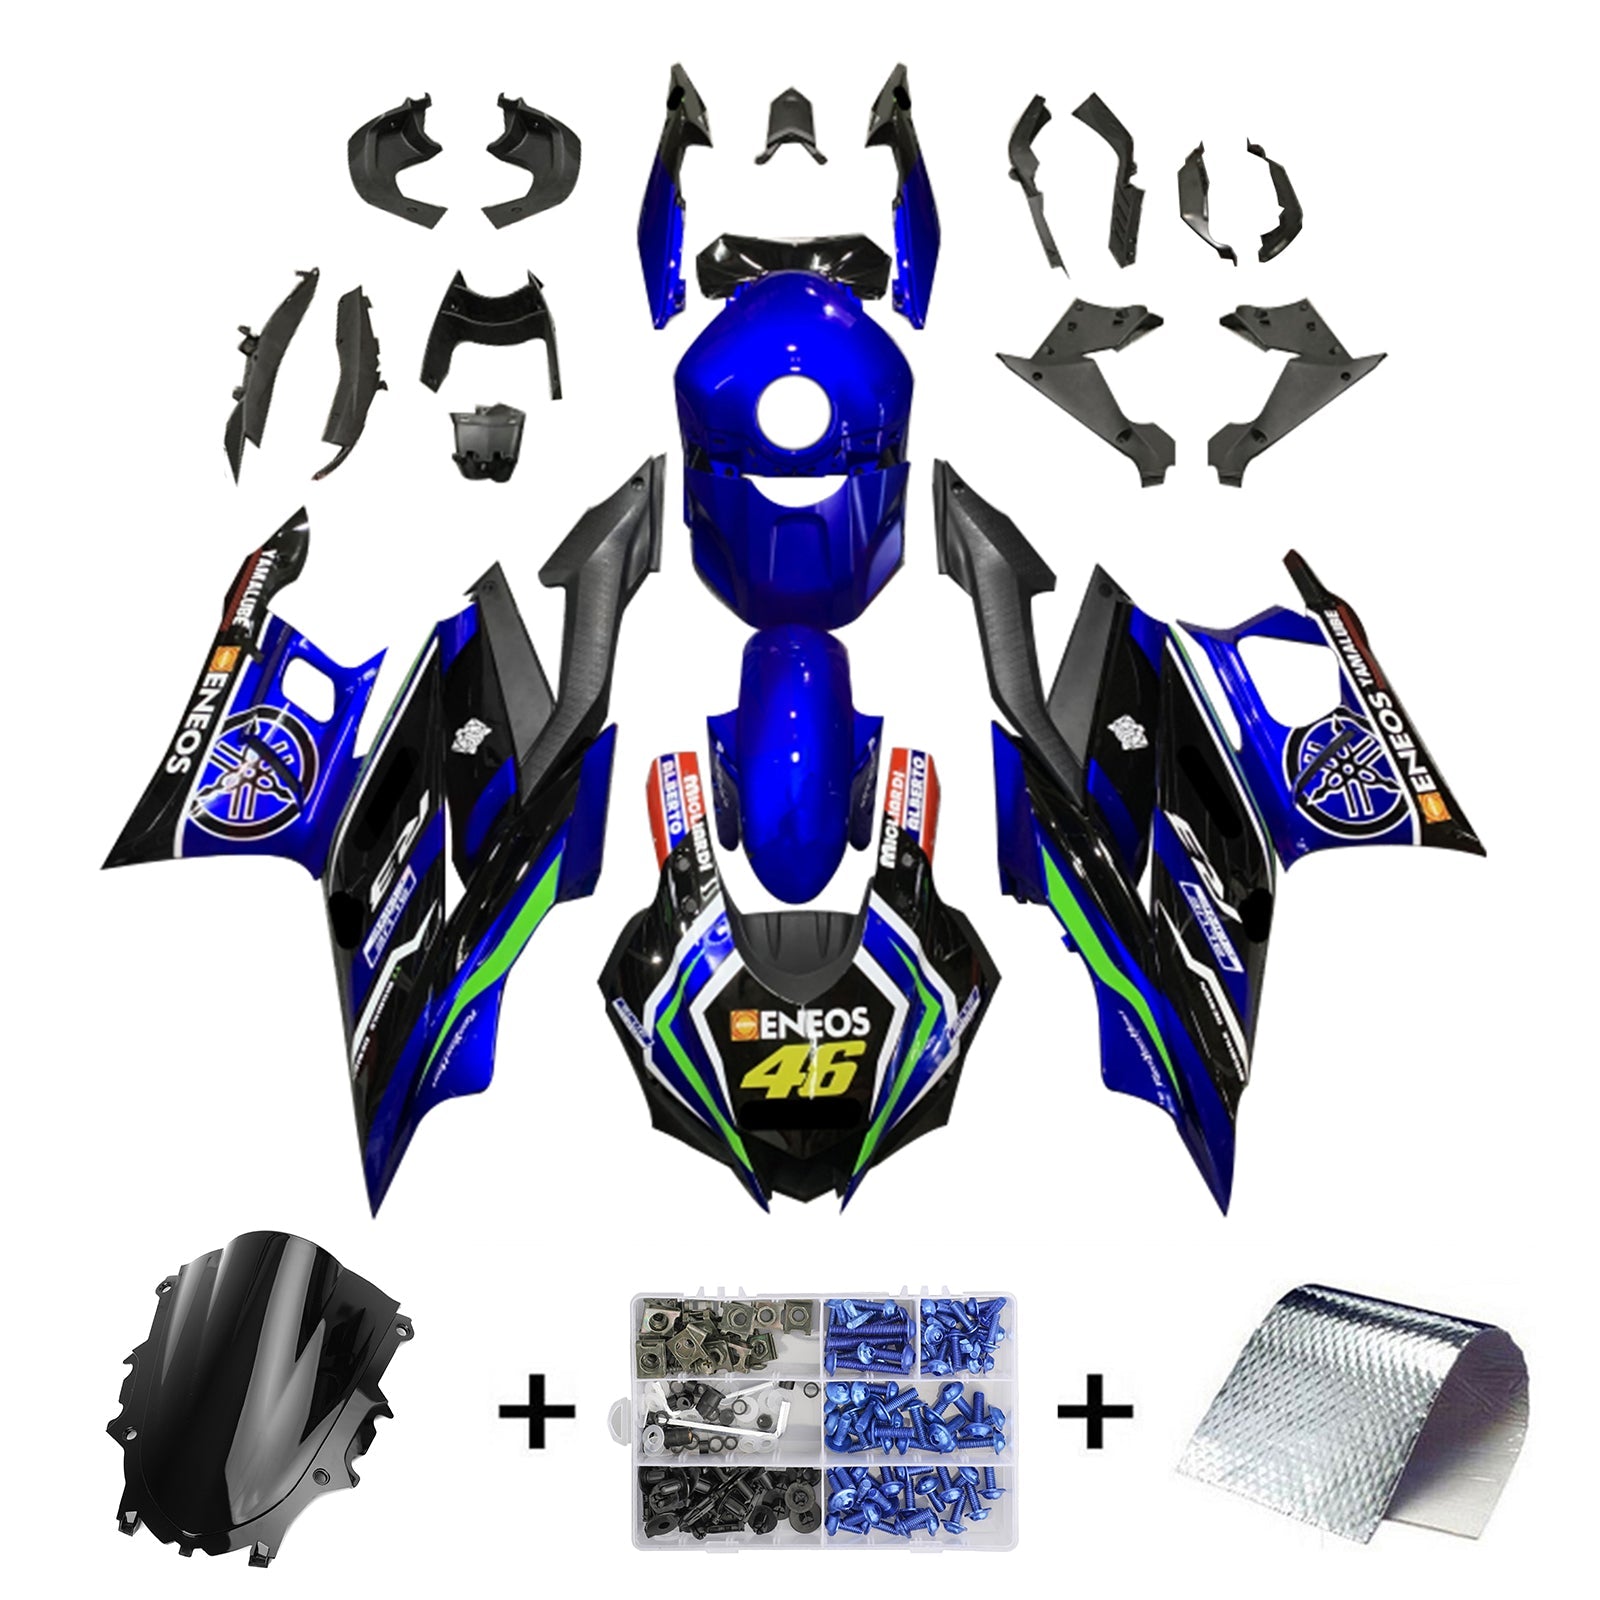 Amotopart Kit carena carrozzeria in plastica ABS per Yamaha YZF-R3 R25 2019-2021